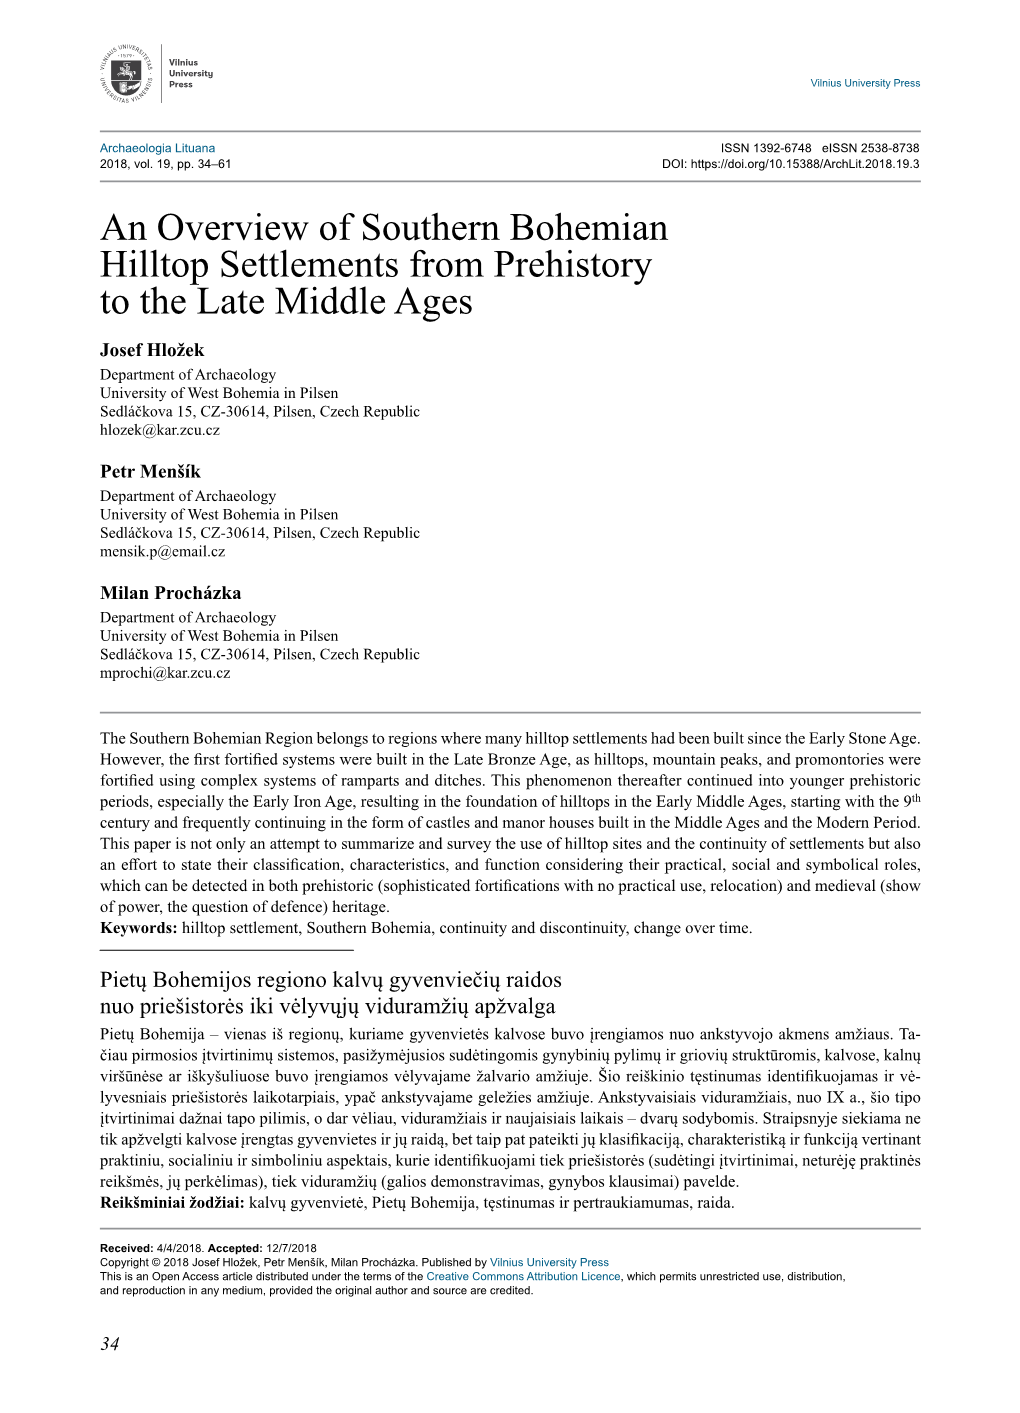 An Overview of Southern Bohemian Hilltop Settlements from Prehistory to the Late Middle Ages